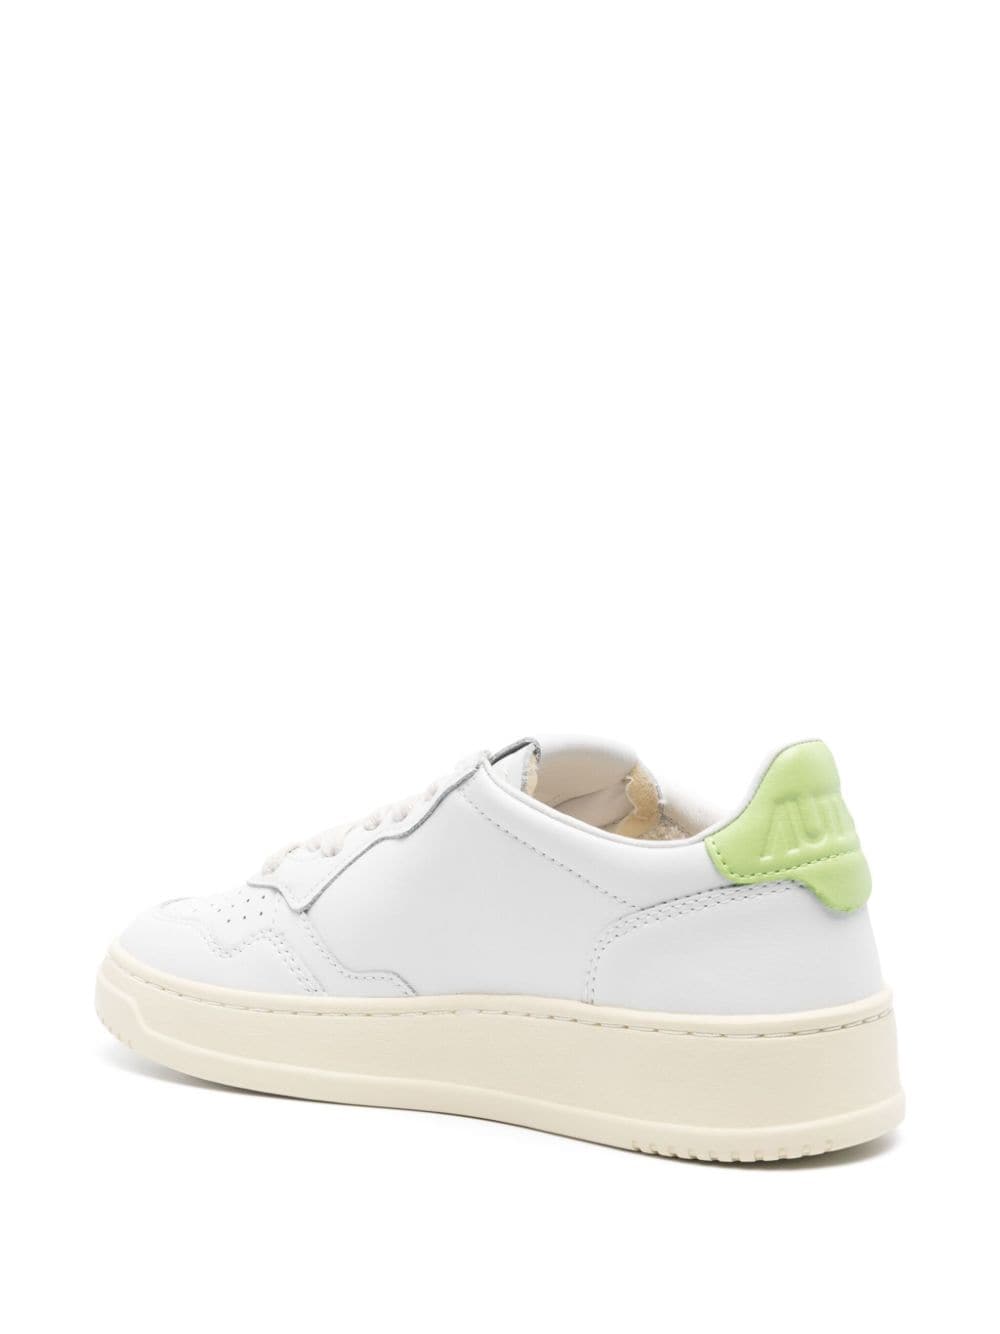 Medalist leather sneakers<BR/><BR/><BR/>